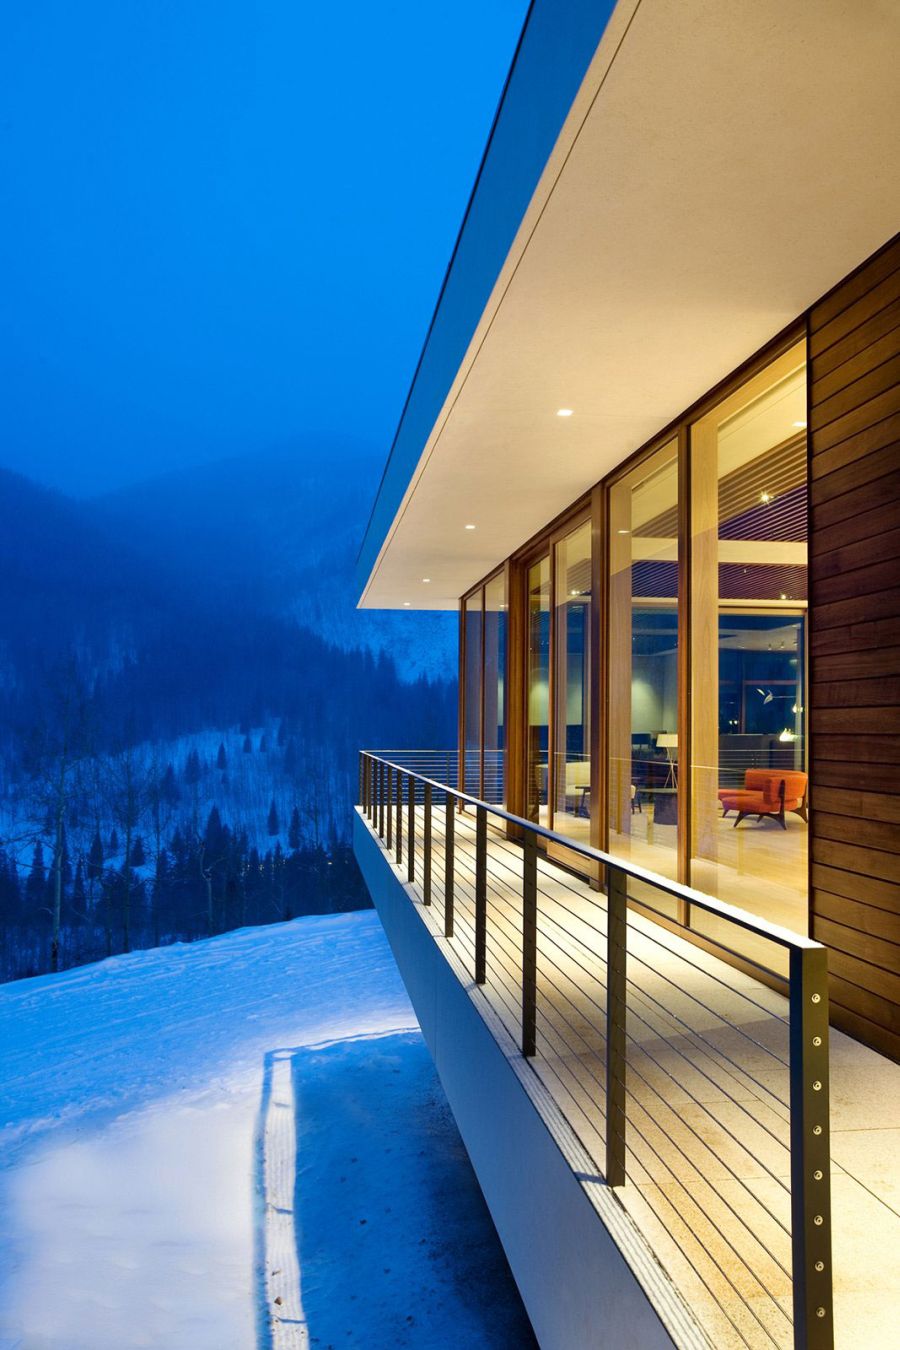 View from the balcony of the Linear House in Aspen, Colorado